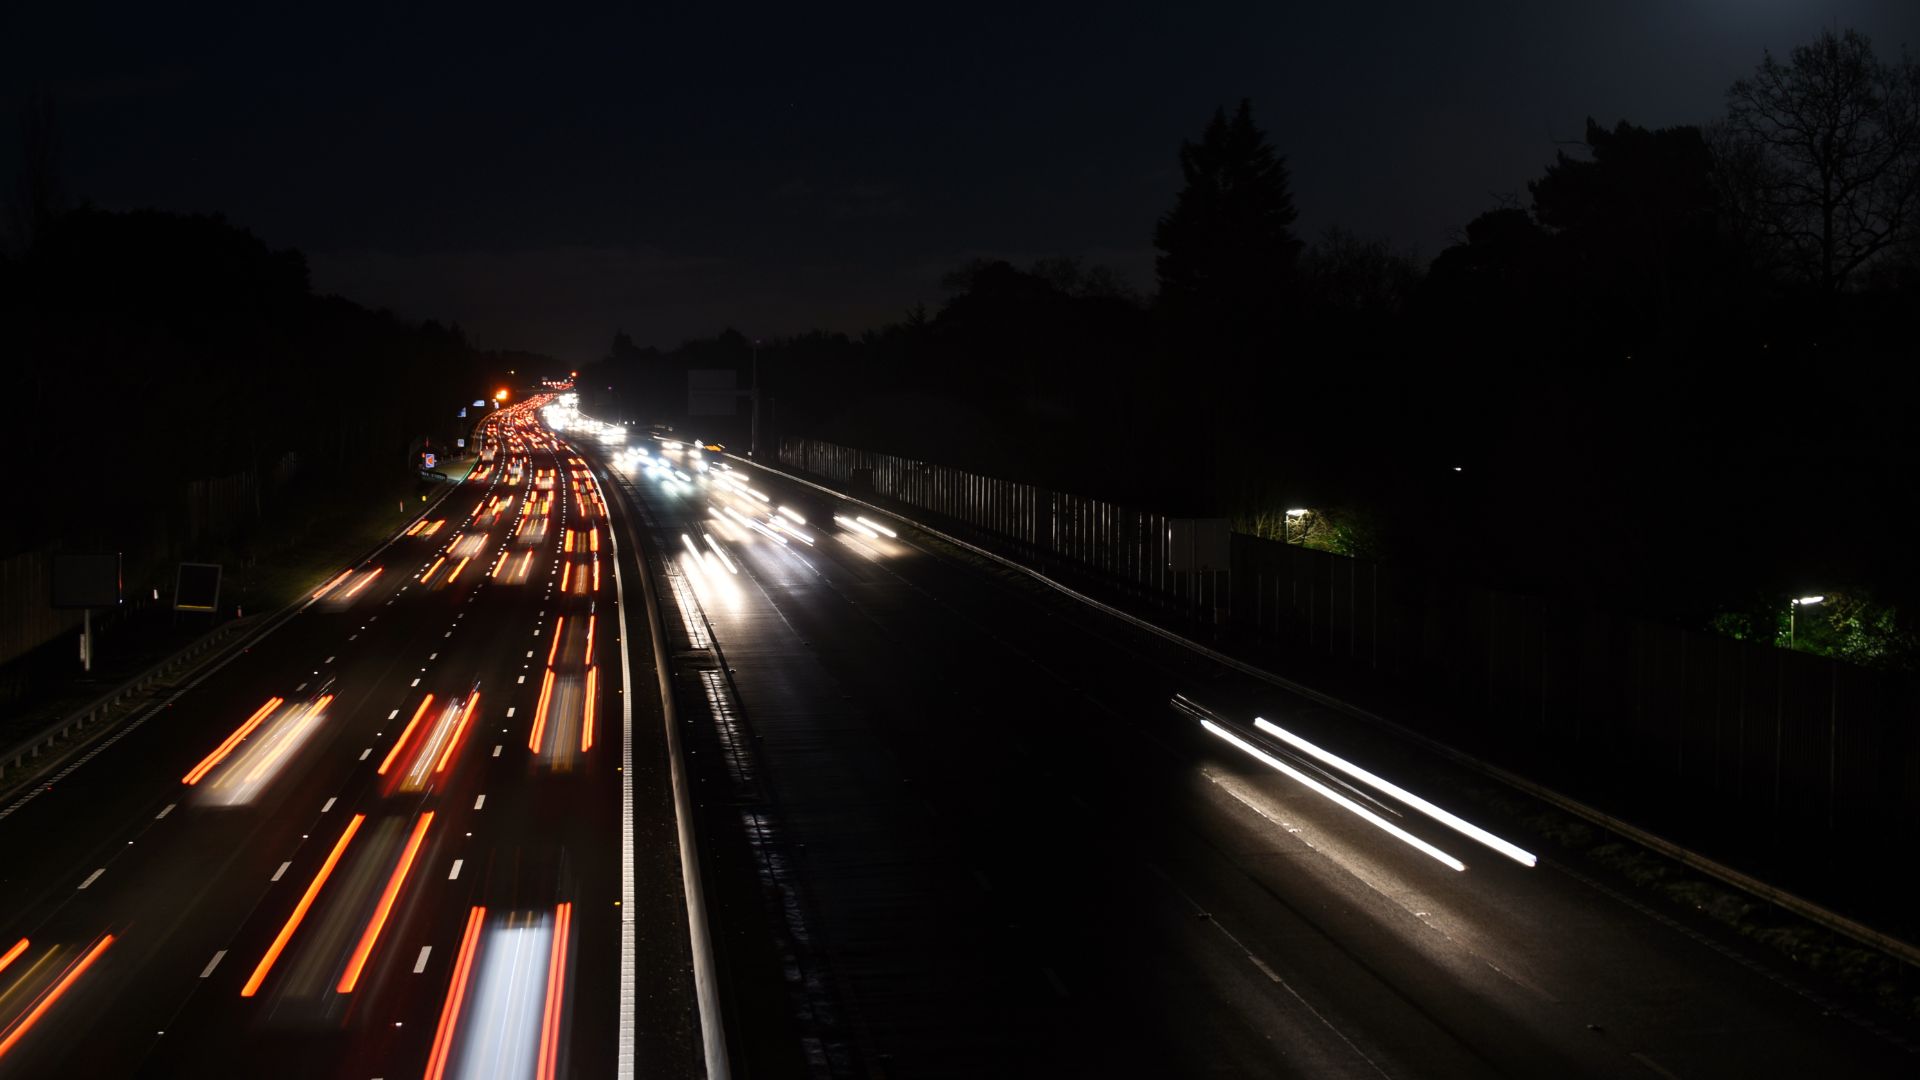 Smart Motorway stopped vehicle detection doesn't always work